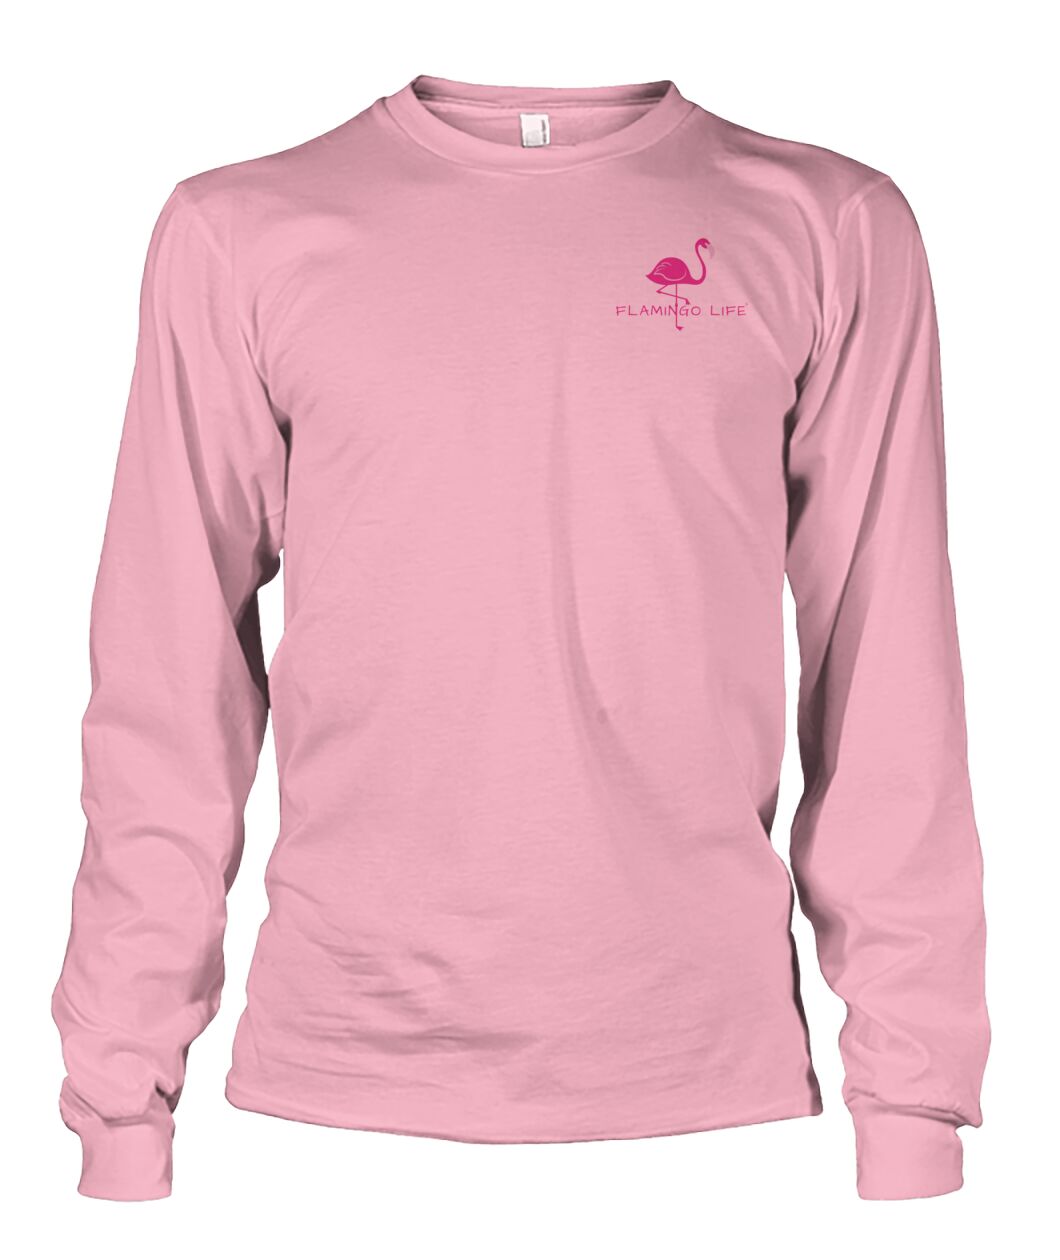 Real Men Wear Pink and Love Flamingos Unisex Long Sleeve